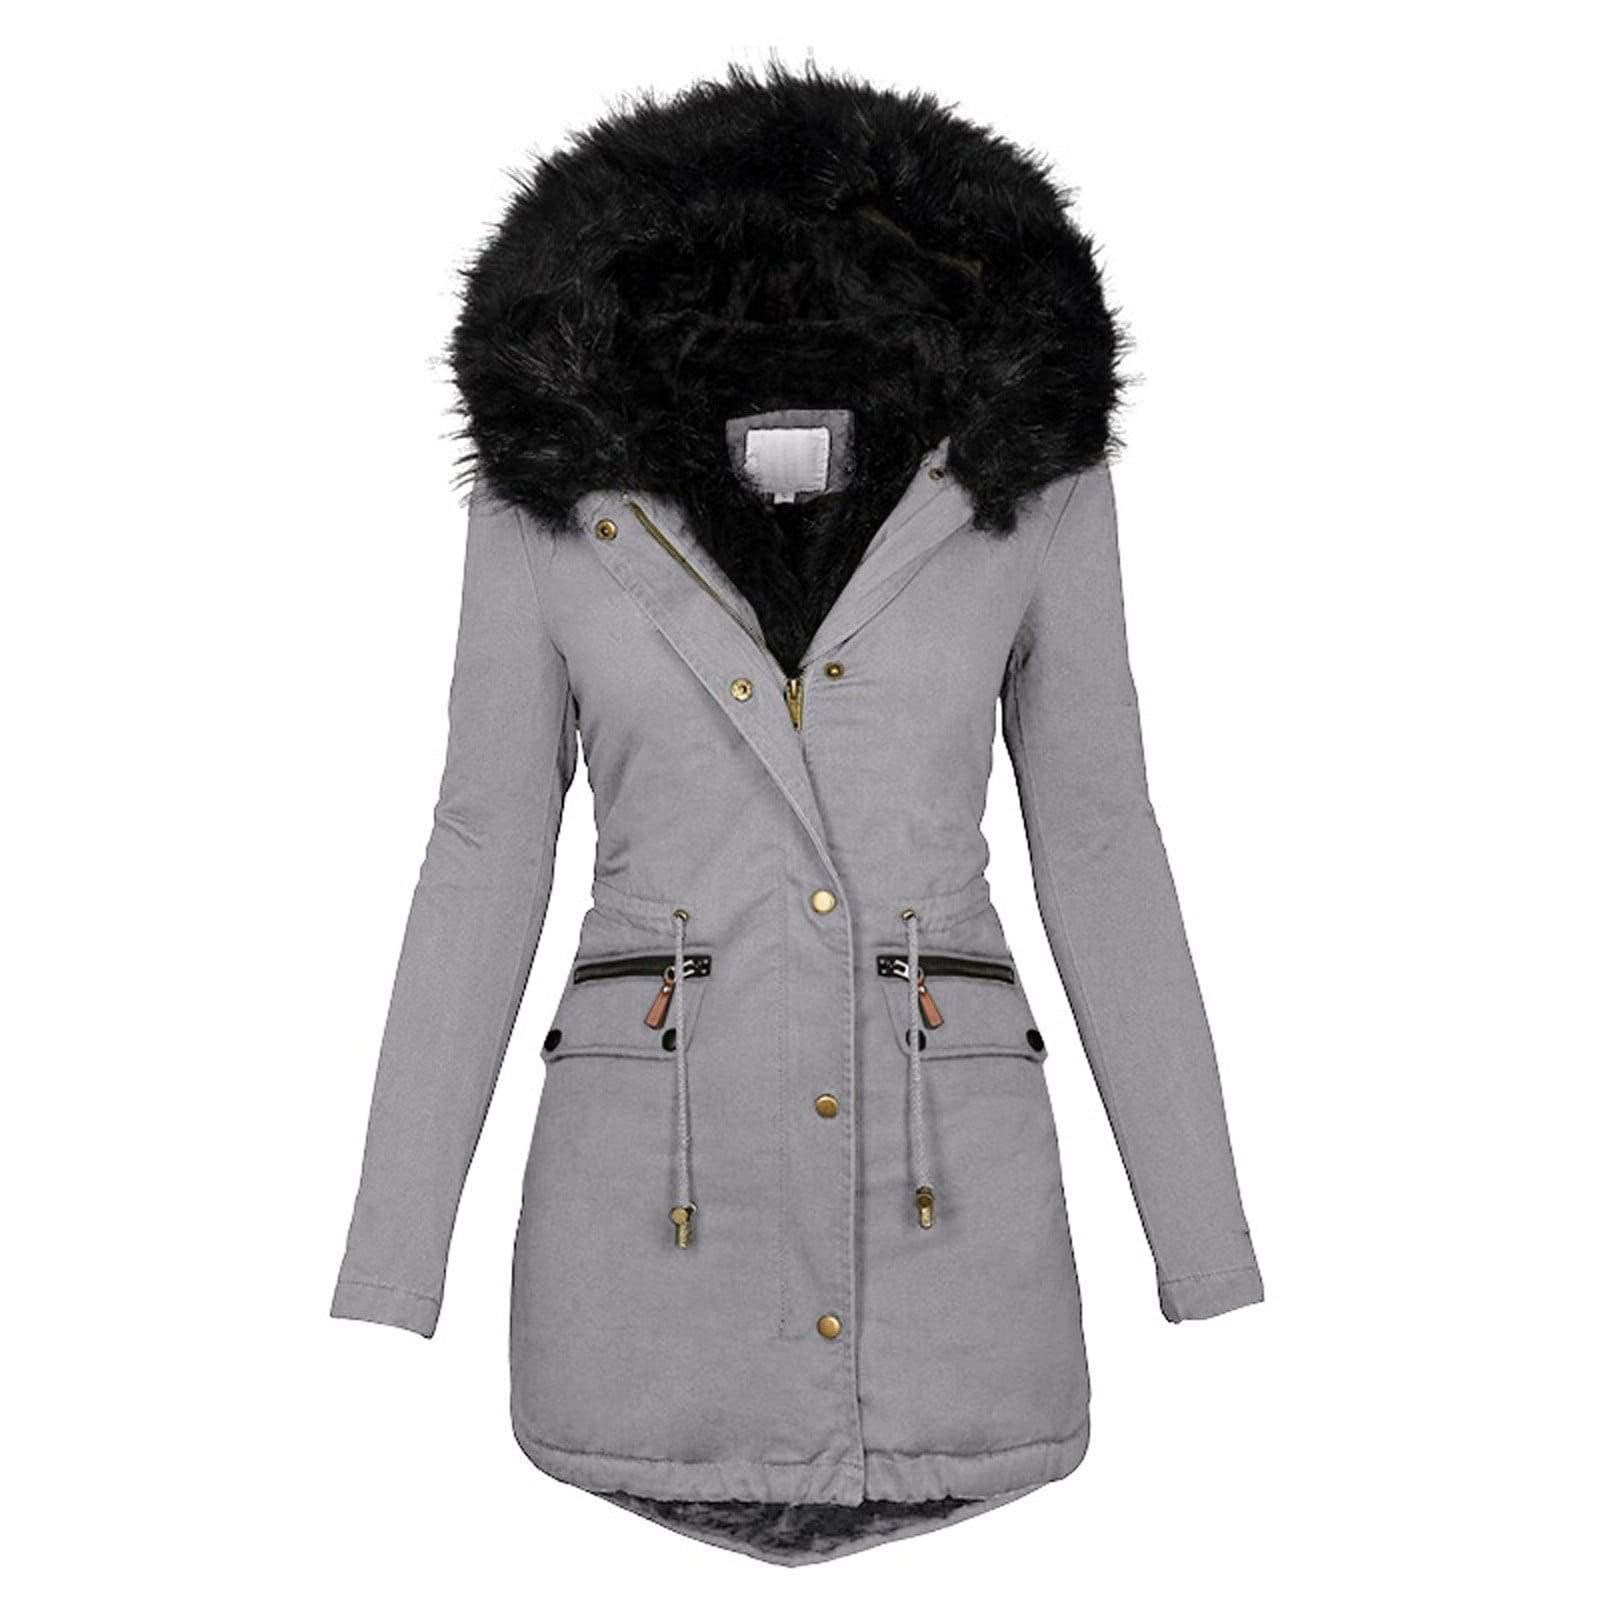 Casual Thicker Winter Slim Coat - For Women USA